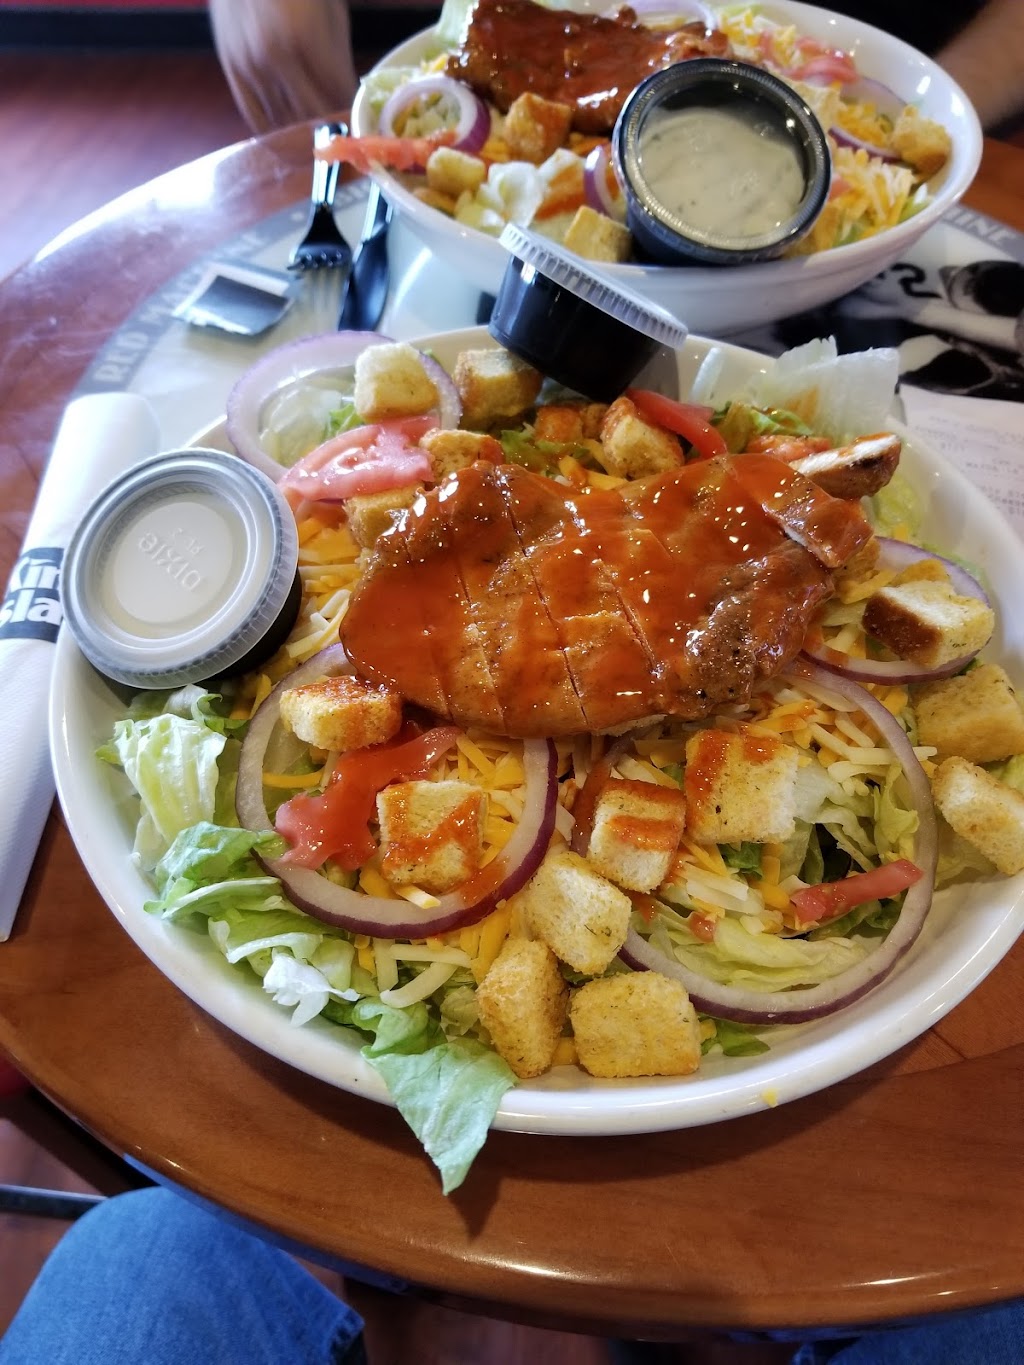 Reds Hall of Fame Grille | restaurant | 6300 Kings Island Dr, Mason, OH 45040, USA